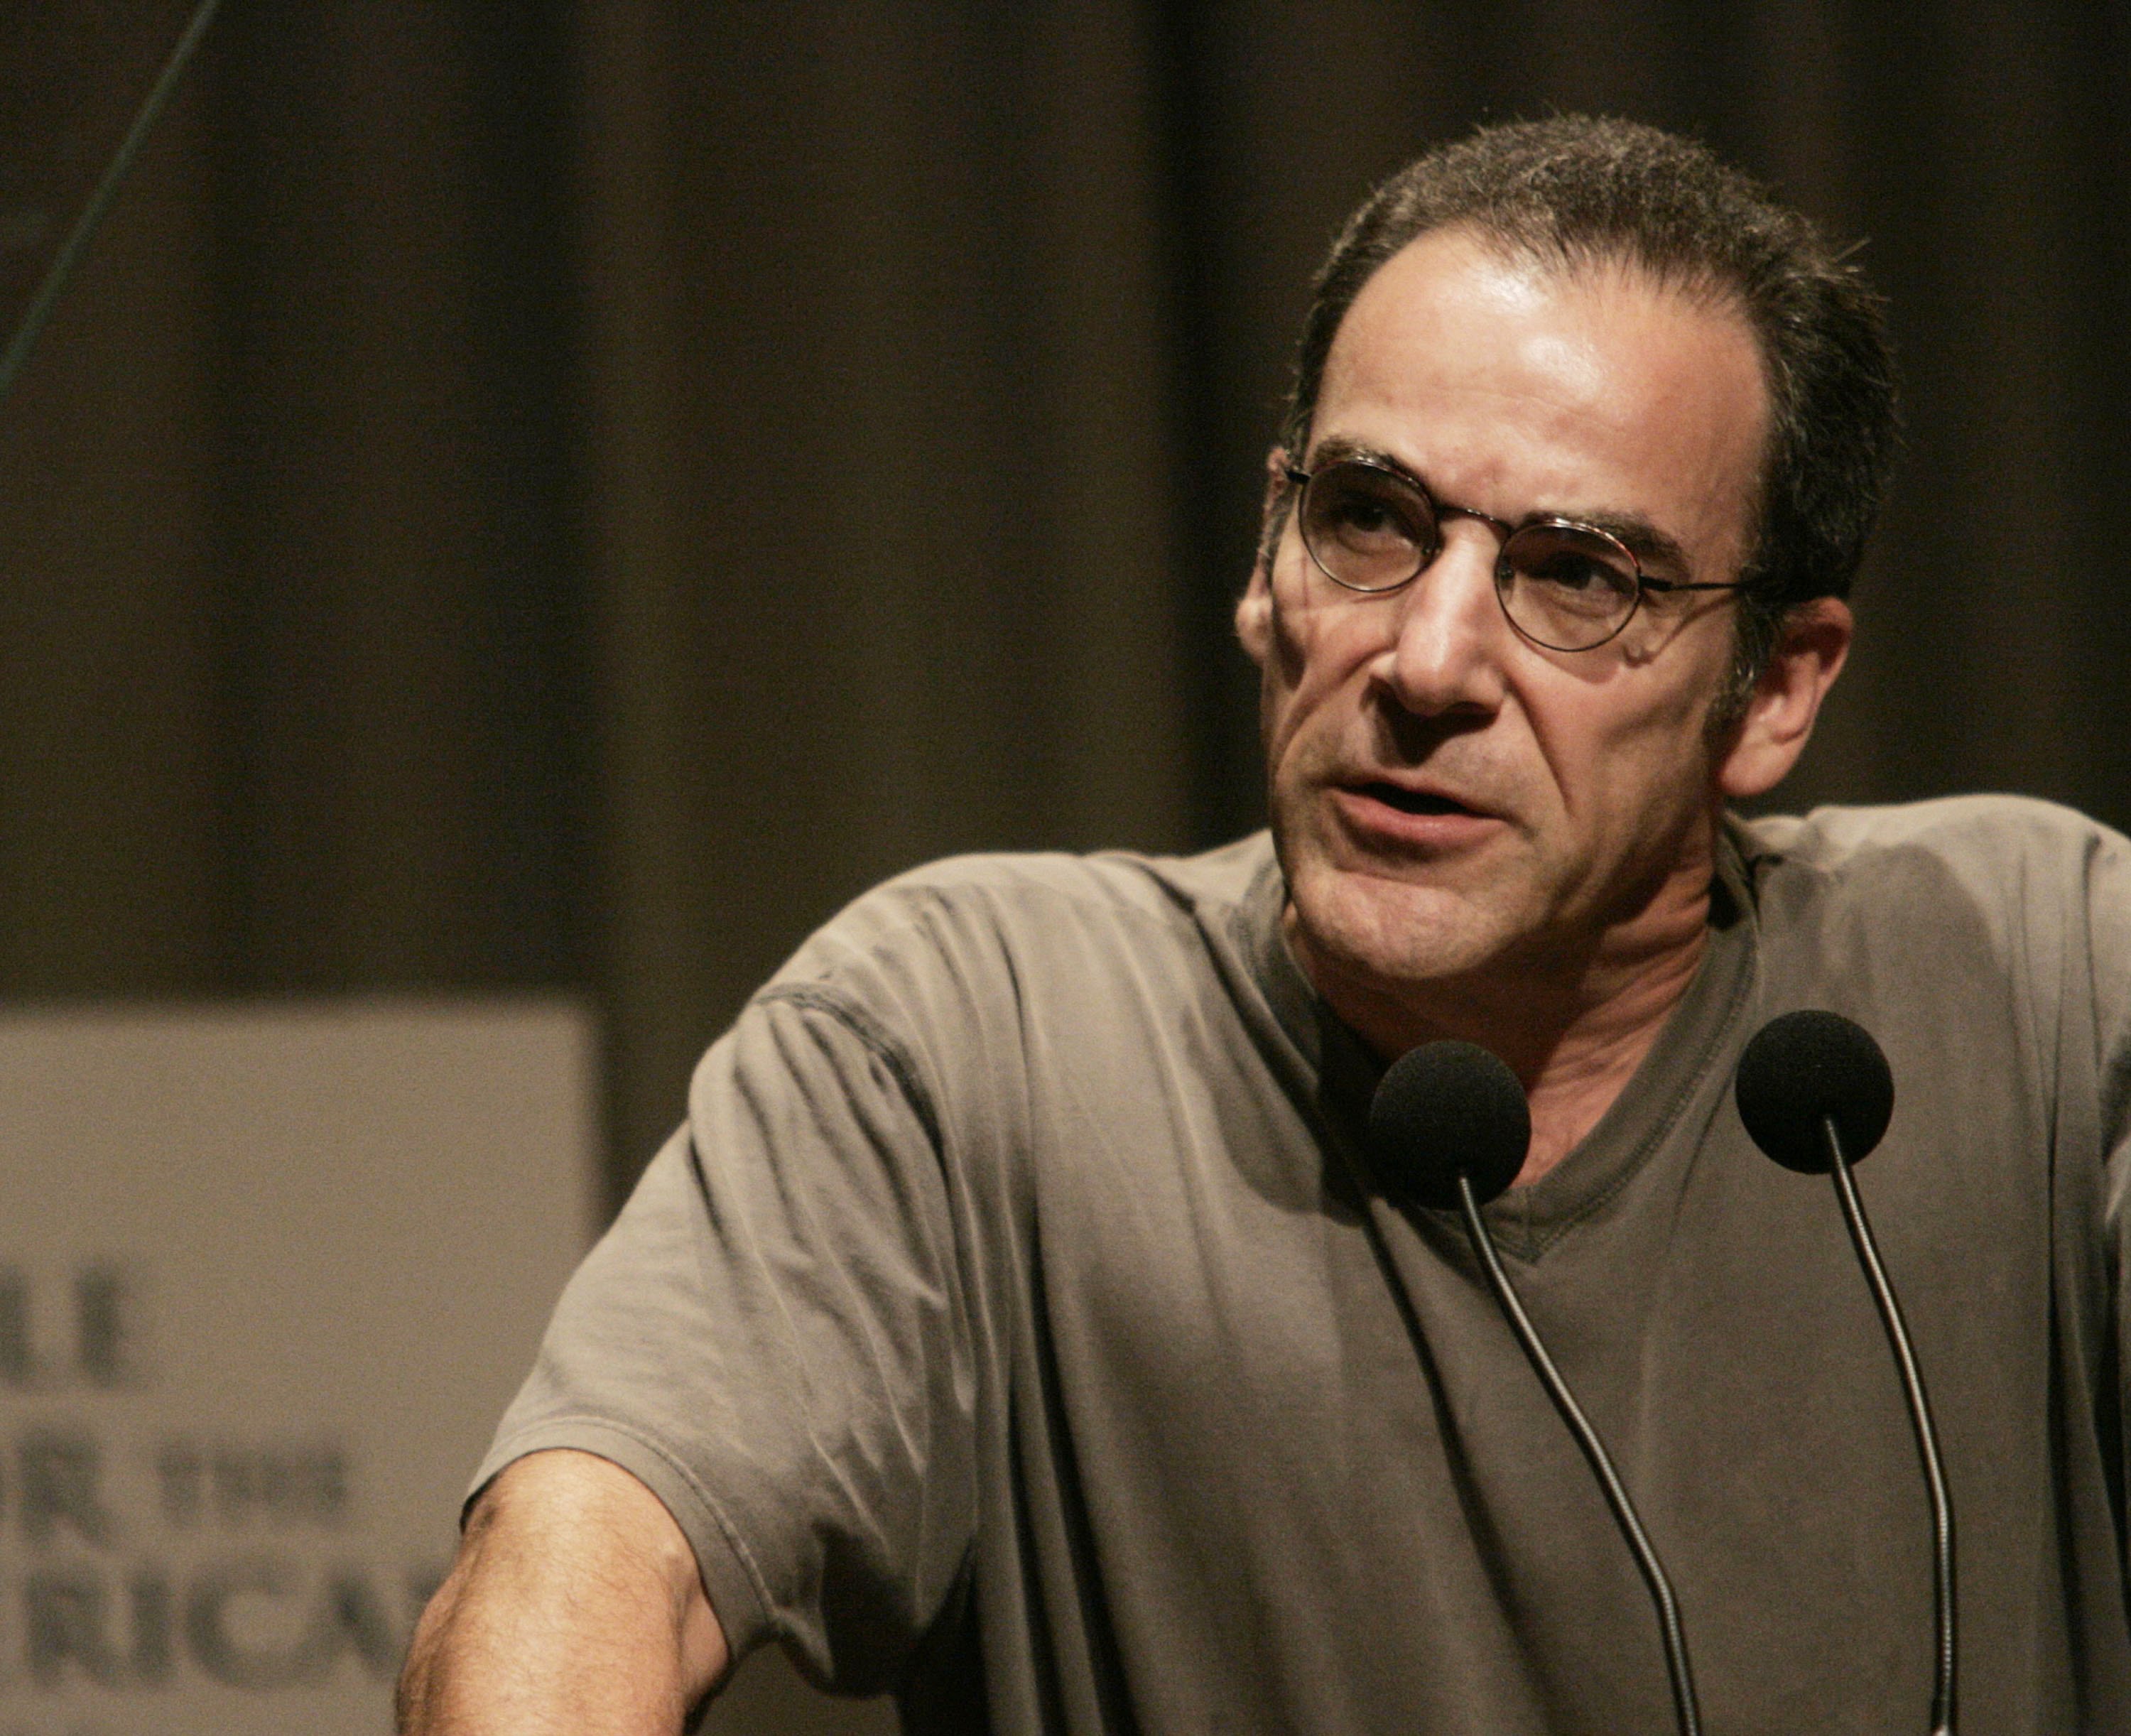 Mandy Patinkin, U.S. Constitution at Cooper Union, 2004 | Quelle: Getty Images